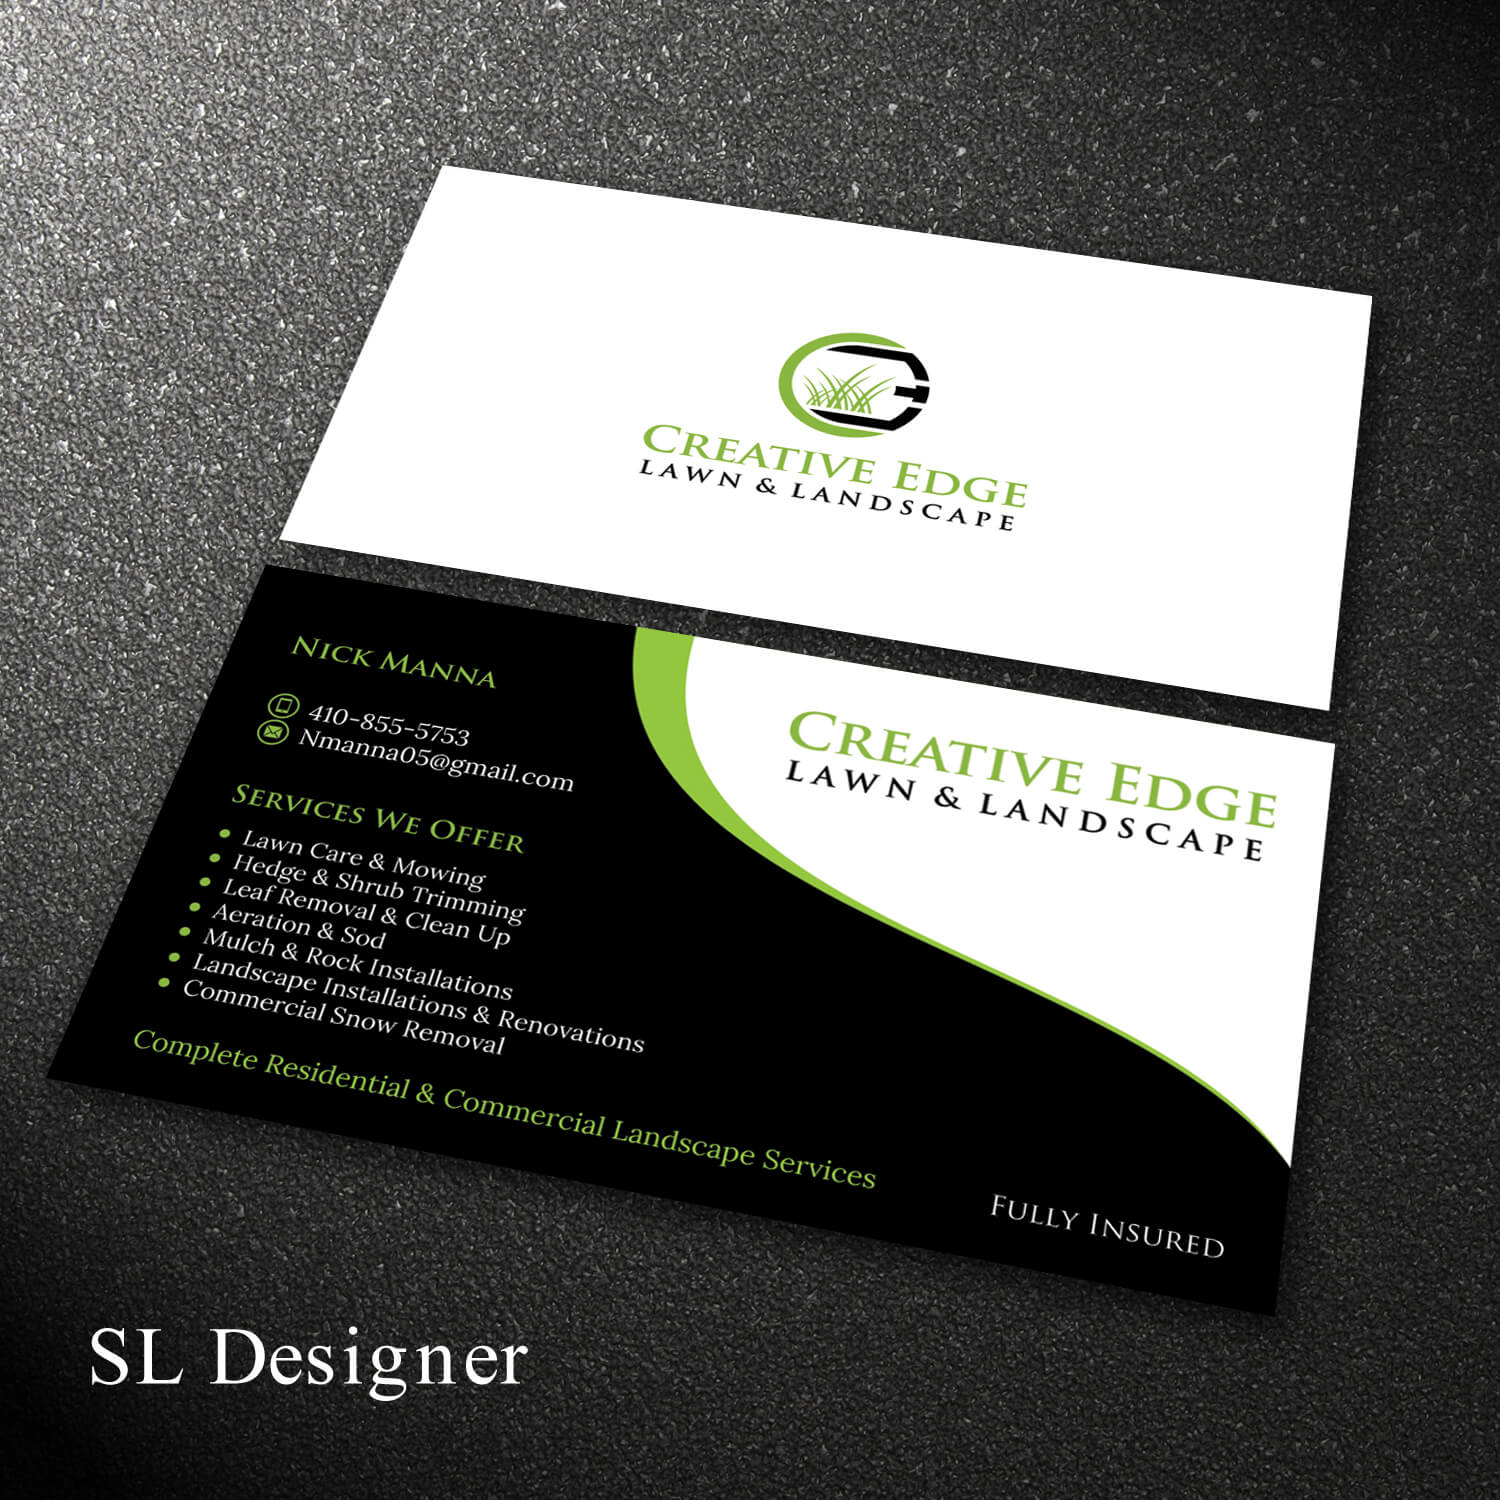 Landscaping Business Cards Templates Free Sample Kit With Regard To Lawn Care Business Cards Templates Free